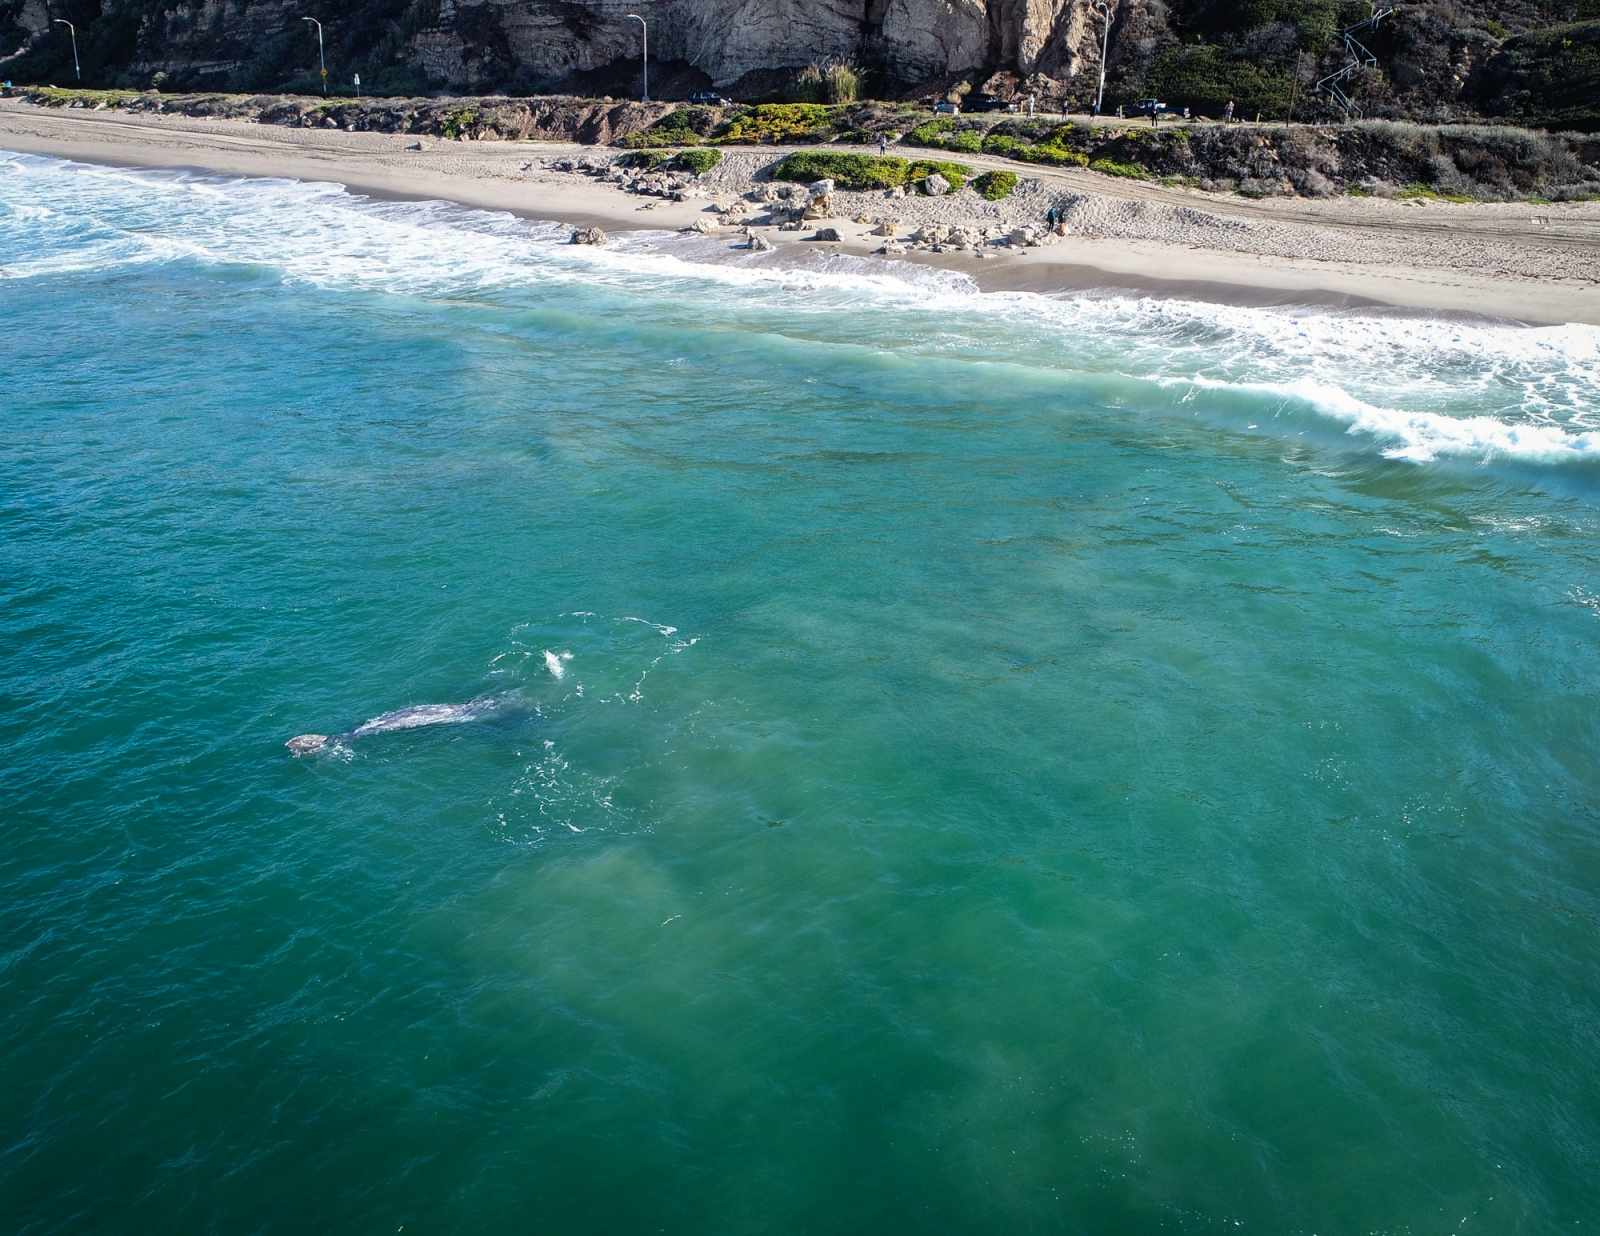 Drone - Migrating whales - 